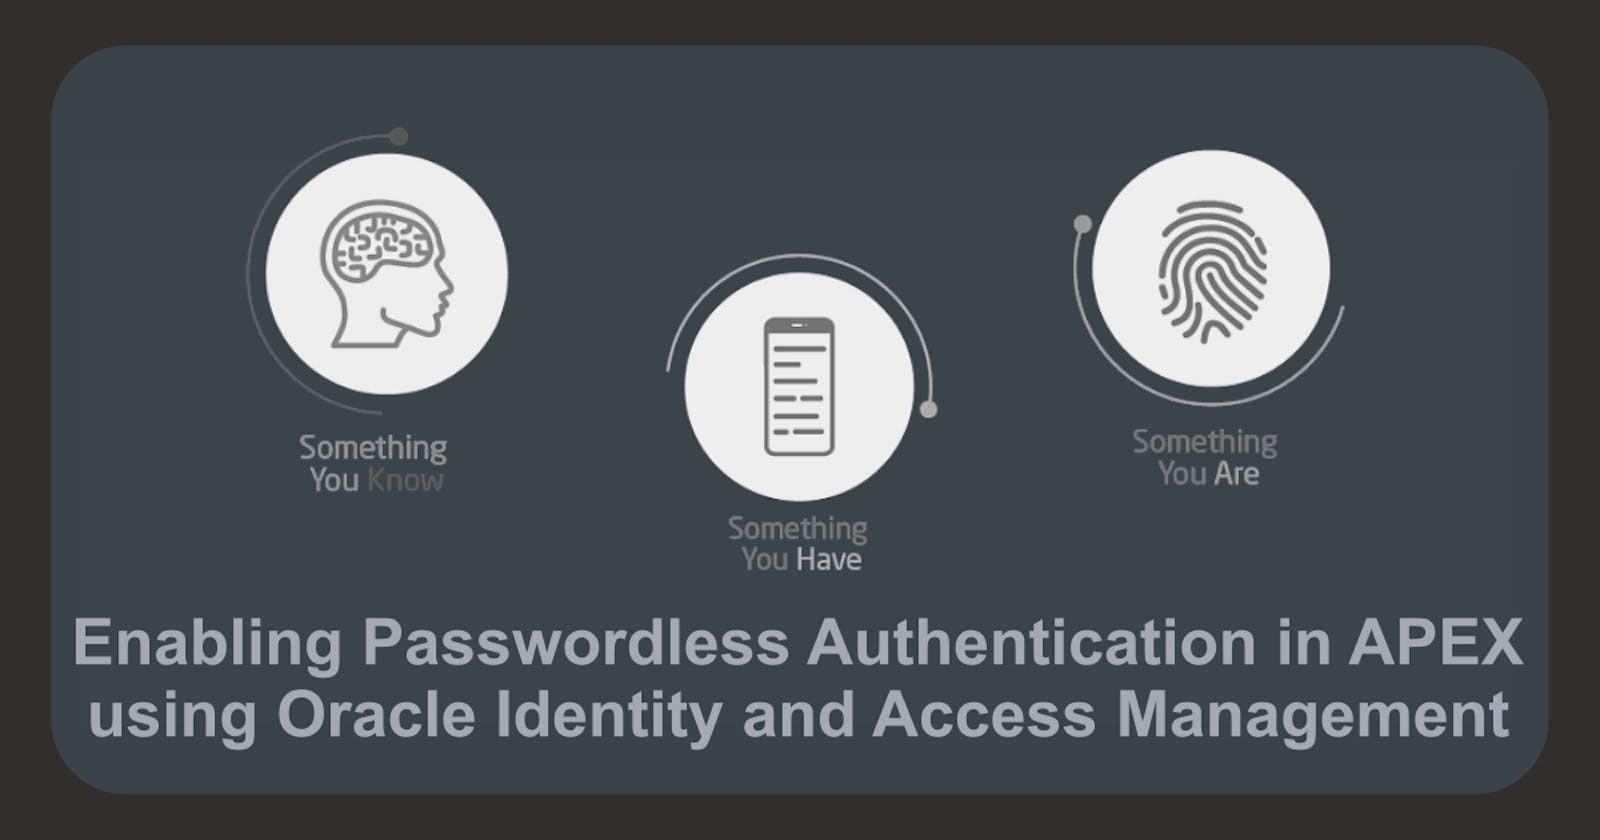 Enabling Passwordless Authentication in APEX using Oracle Identity and Access Management